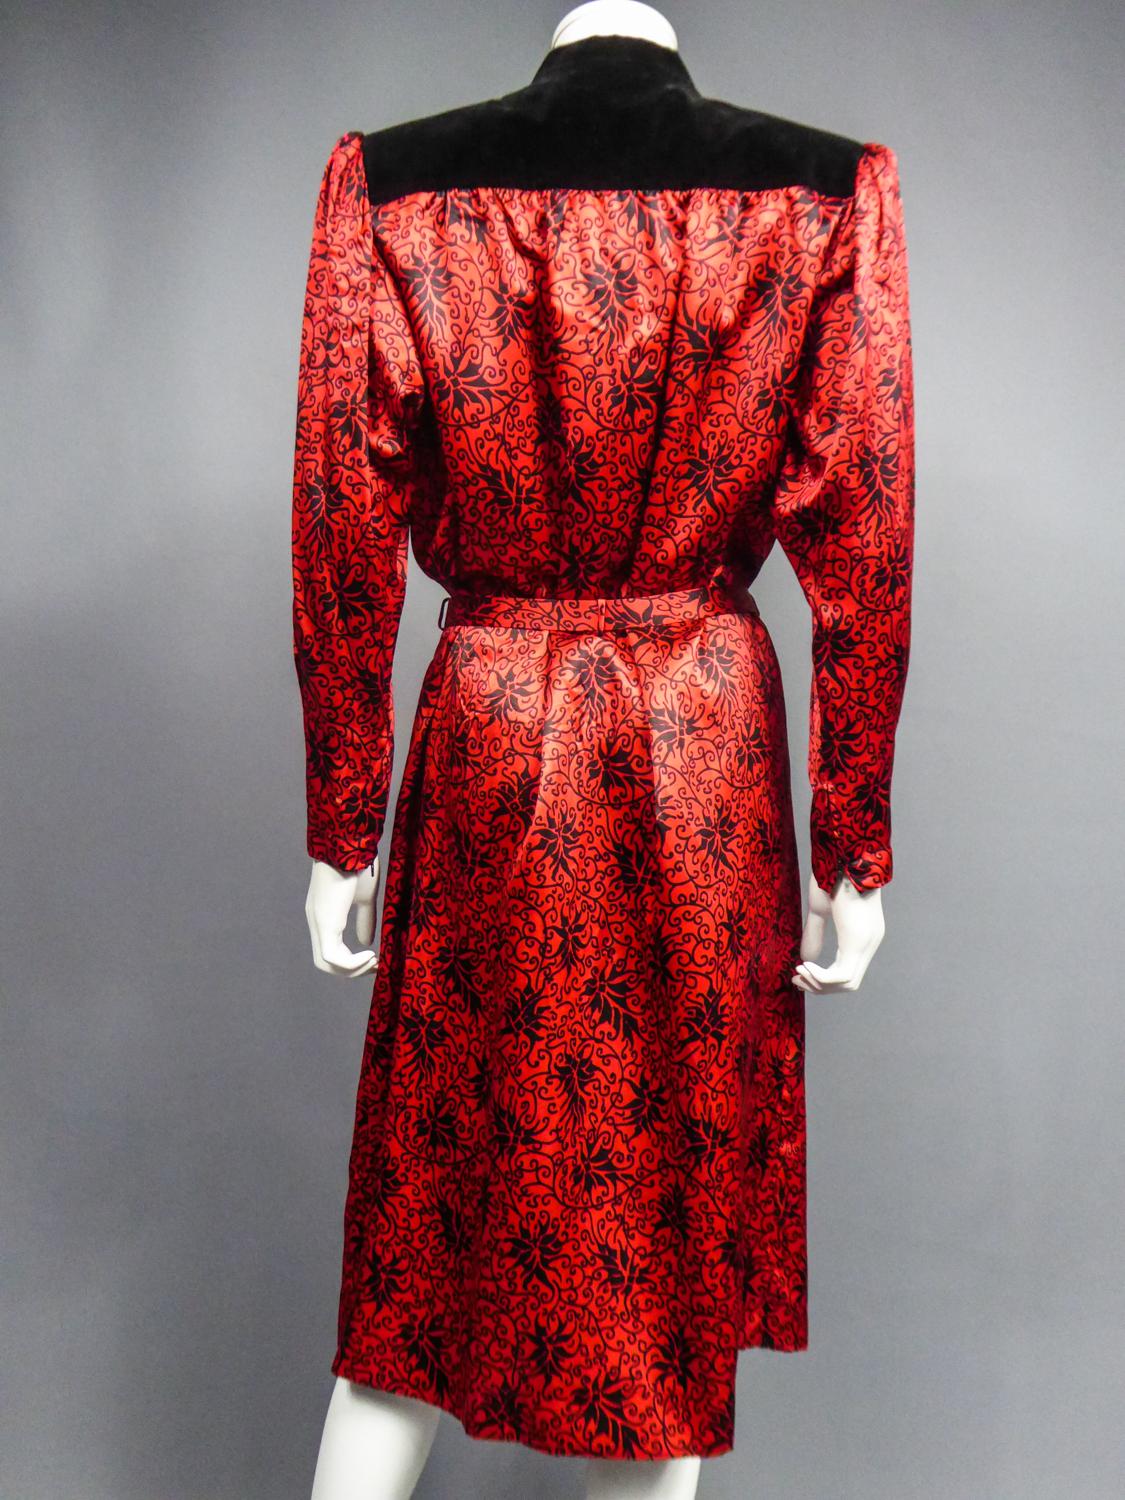 Yves Saint Laurent Variation Blouse Dress in Printed Satin Circa 1990 For Sale 7